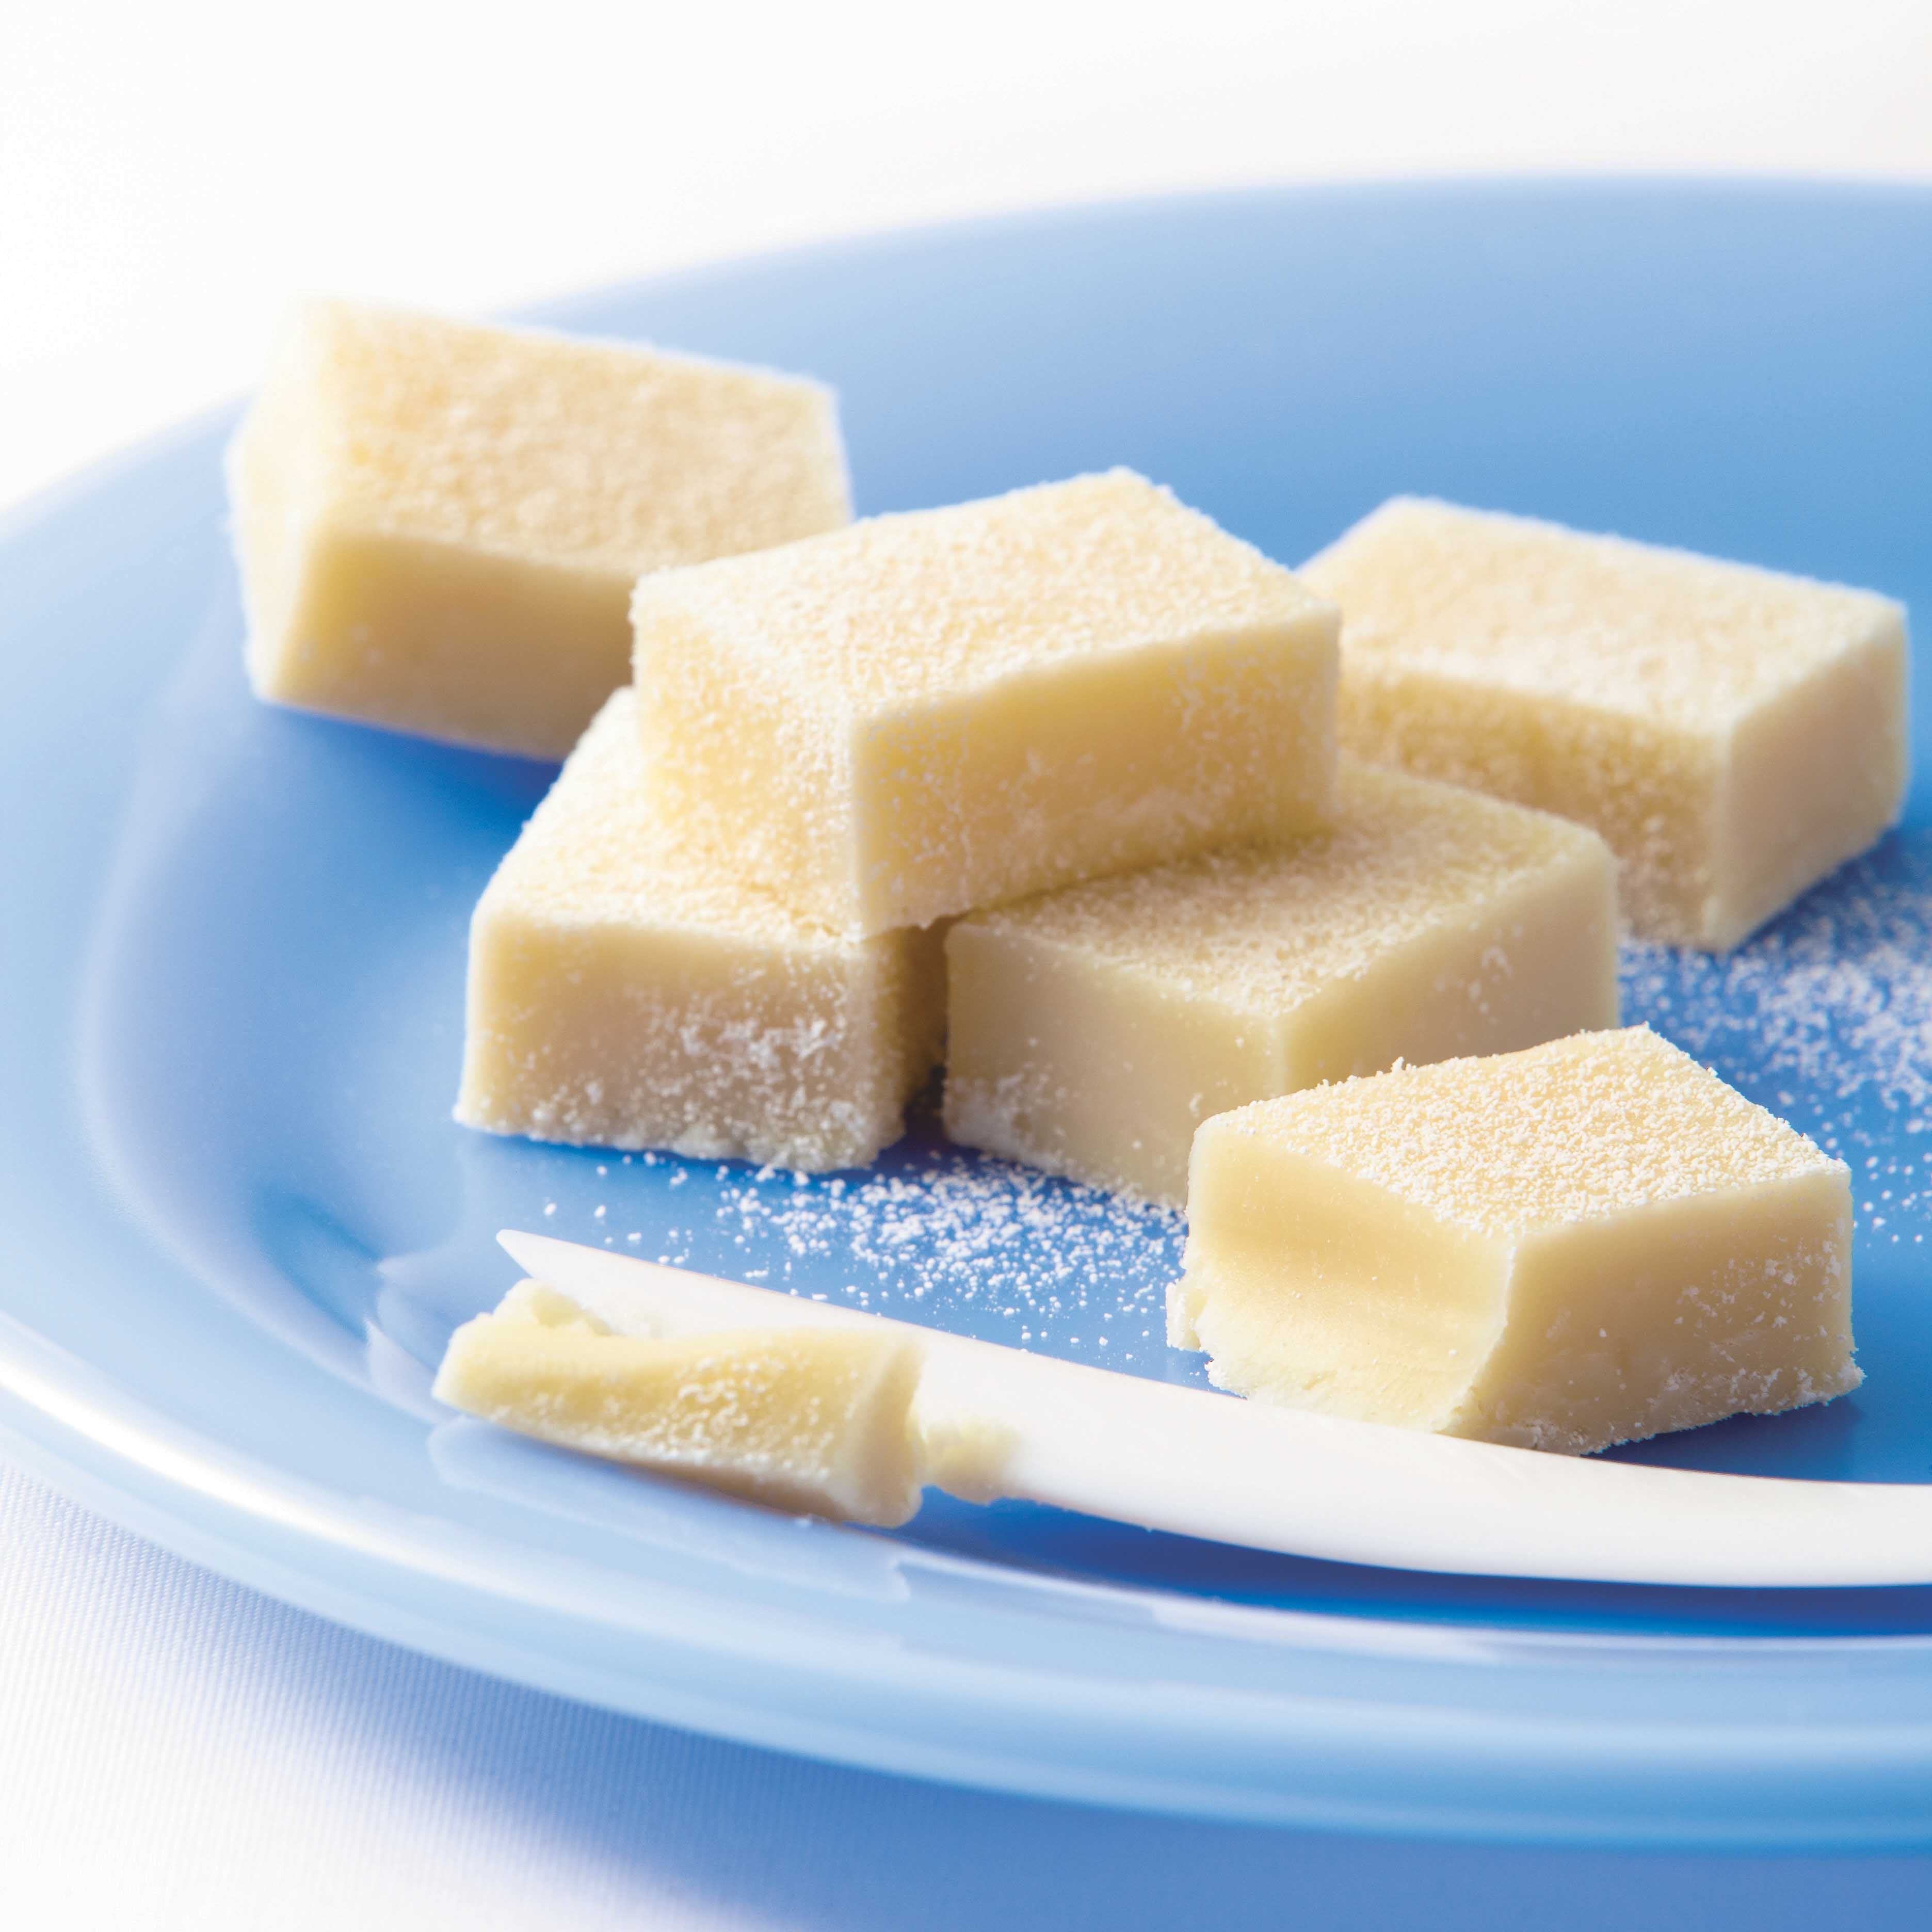 Image shows white ROYCE' Chocolate blocks on a blue plate.